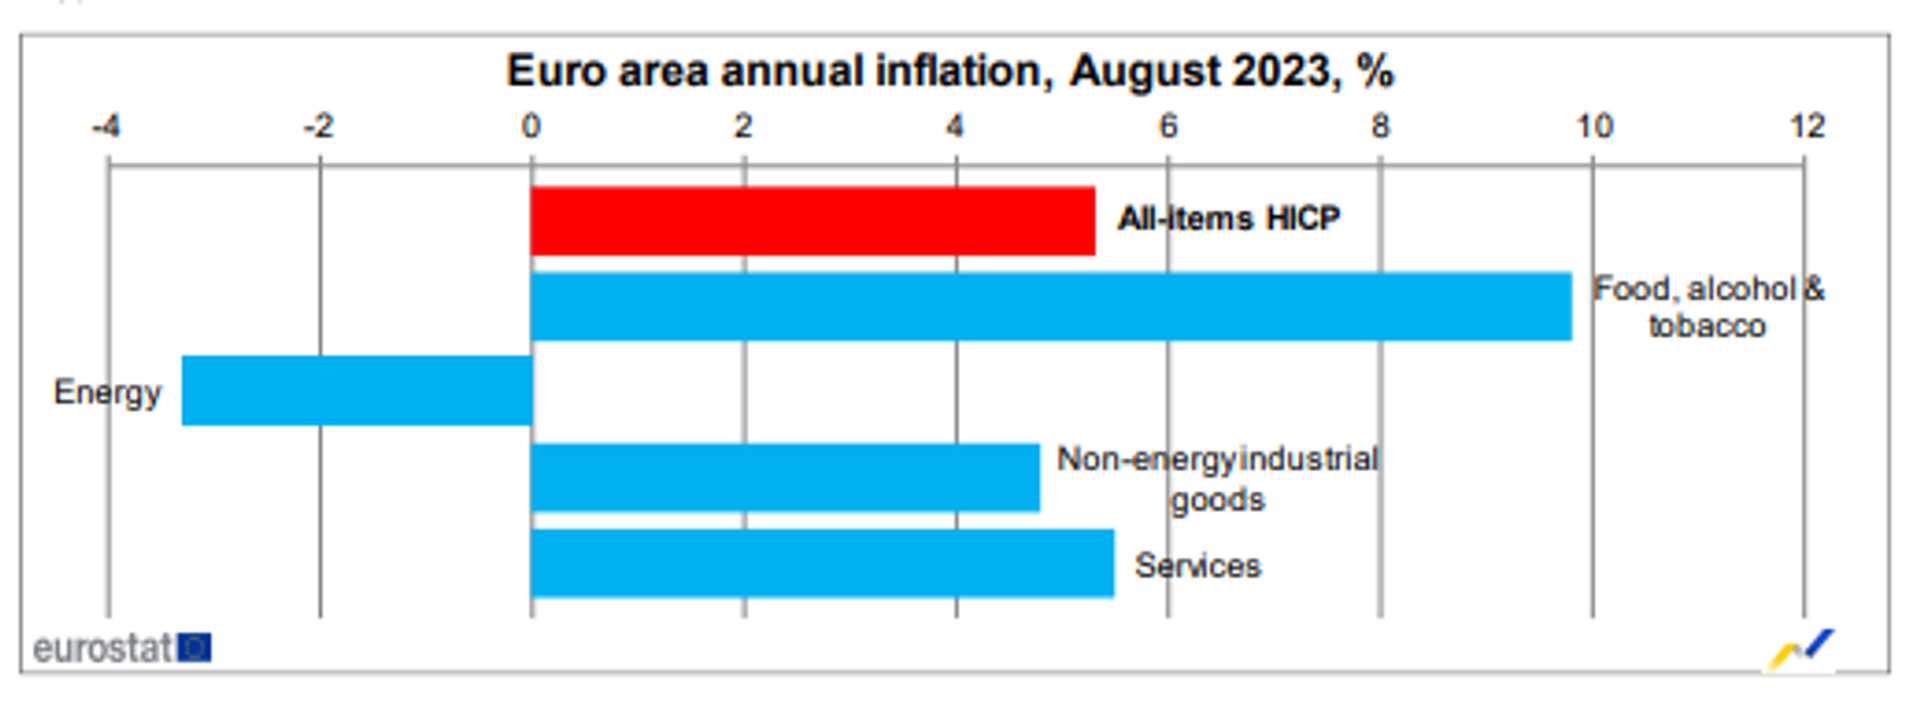 Screengrab of chart showing flash estimate of Euro area annual inflation released on August 31, 2023, by Eurostat, the statistical office of the European Union. - Sputnik International, 1920, 01.09.2023